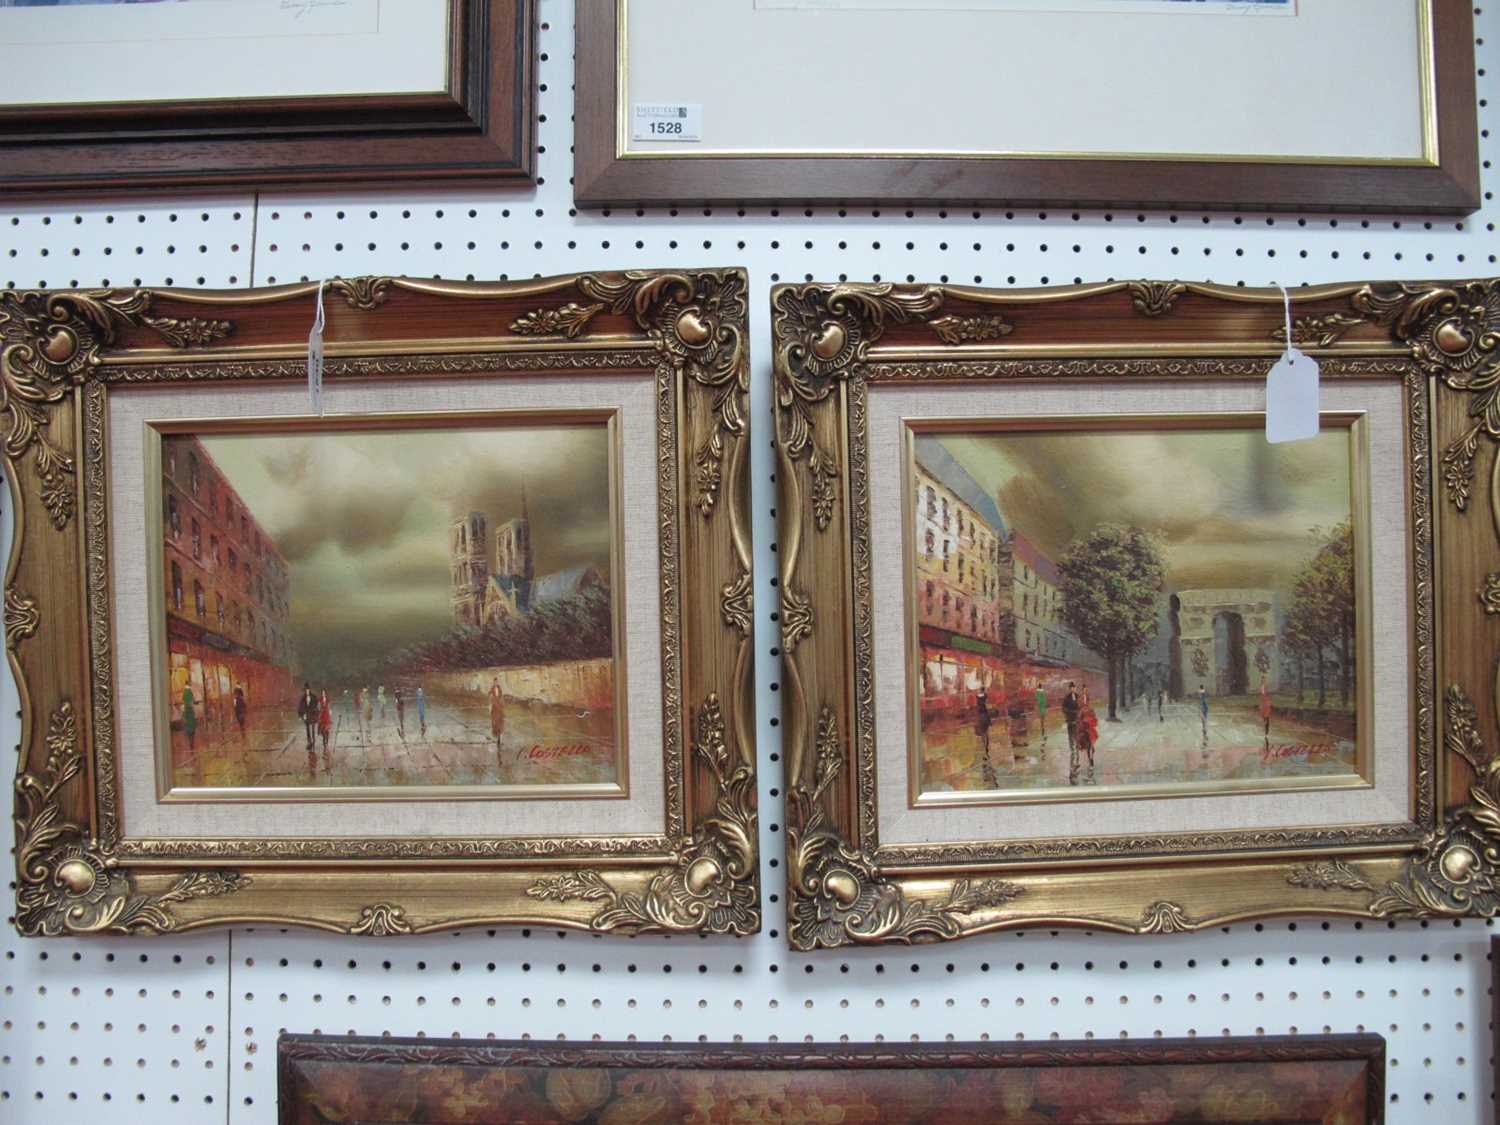 I.Costello, Parisian Street Scenes, pair of oils on board, signed lower right, 19 x 24cm. (2).